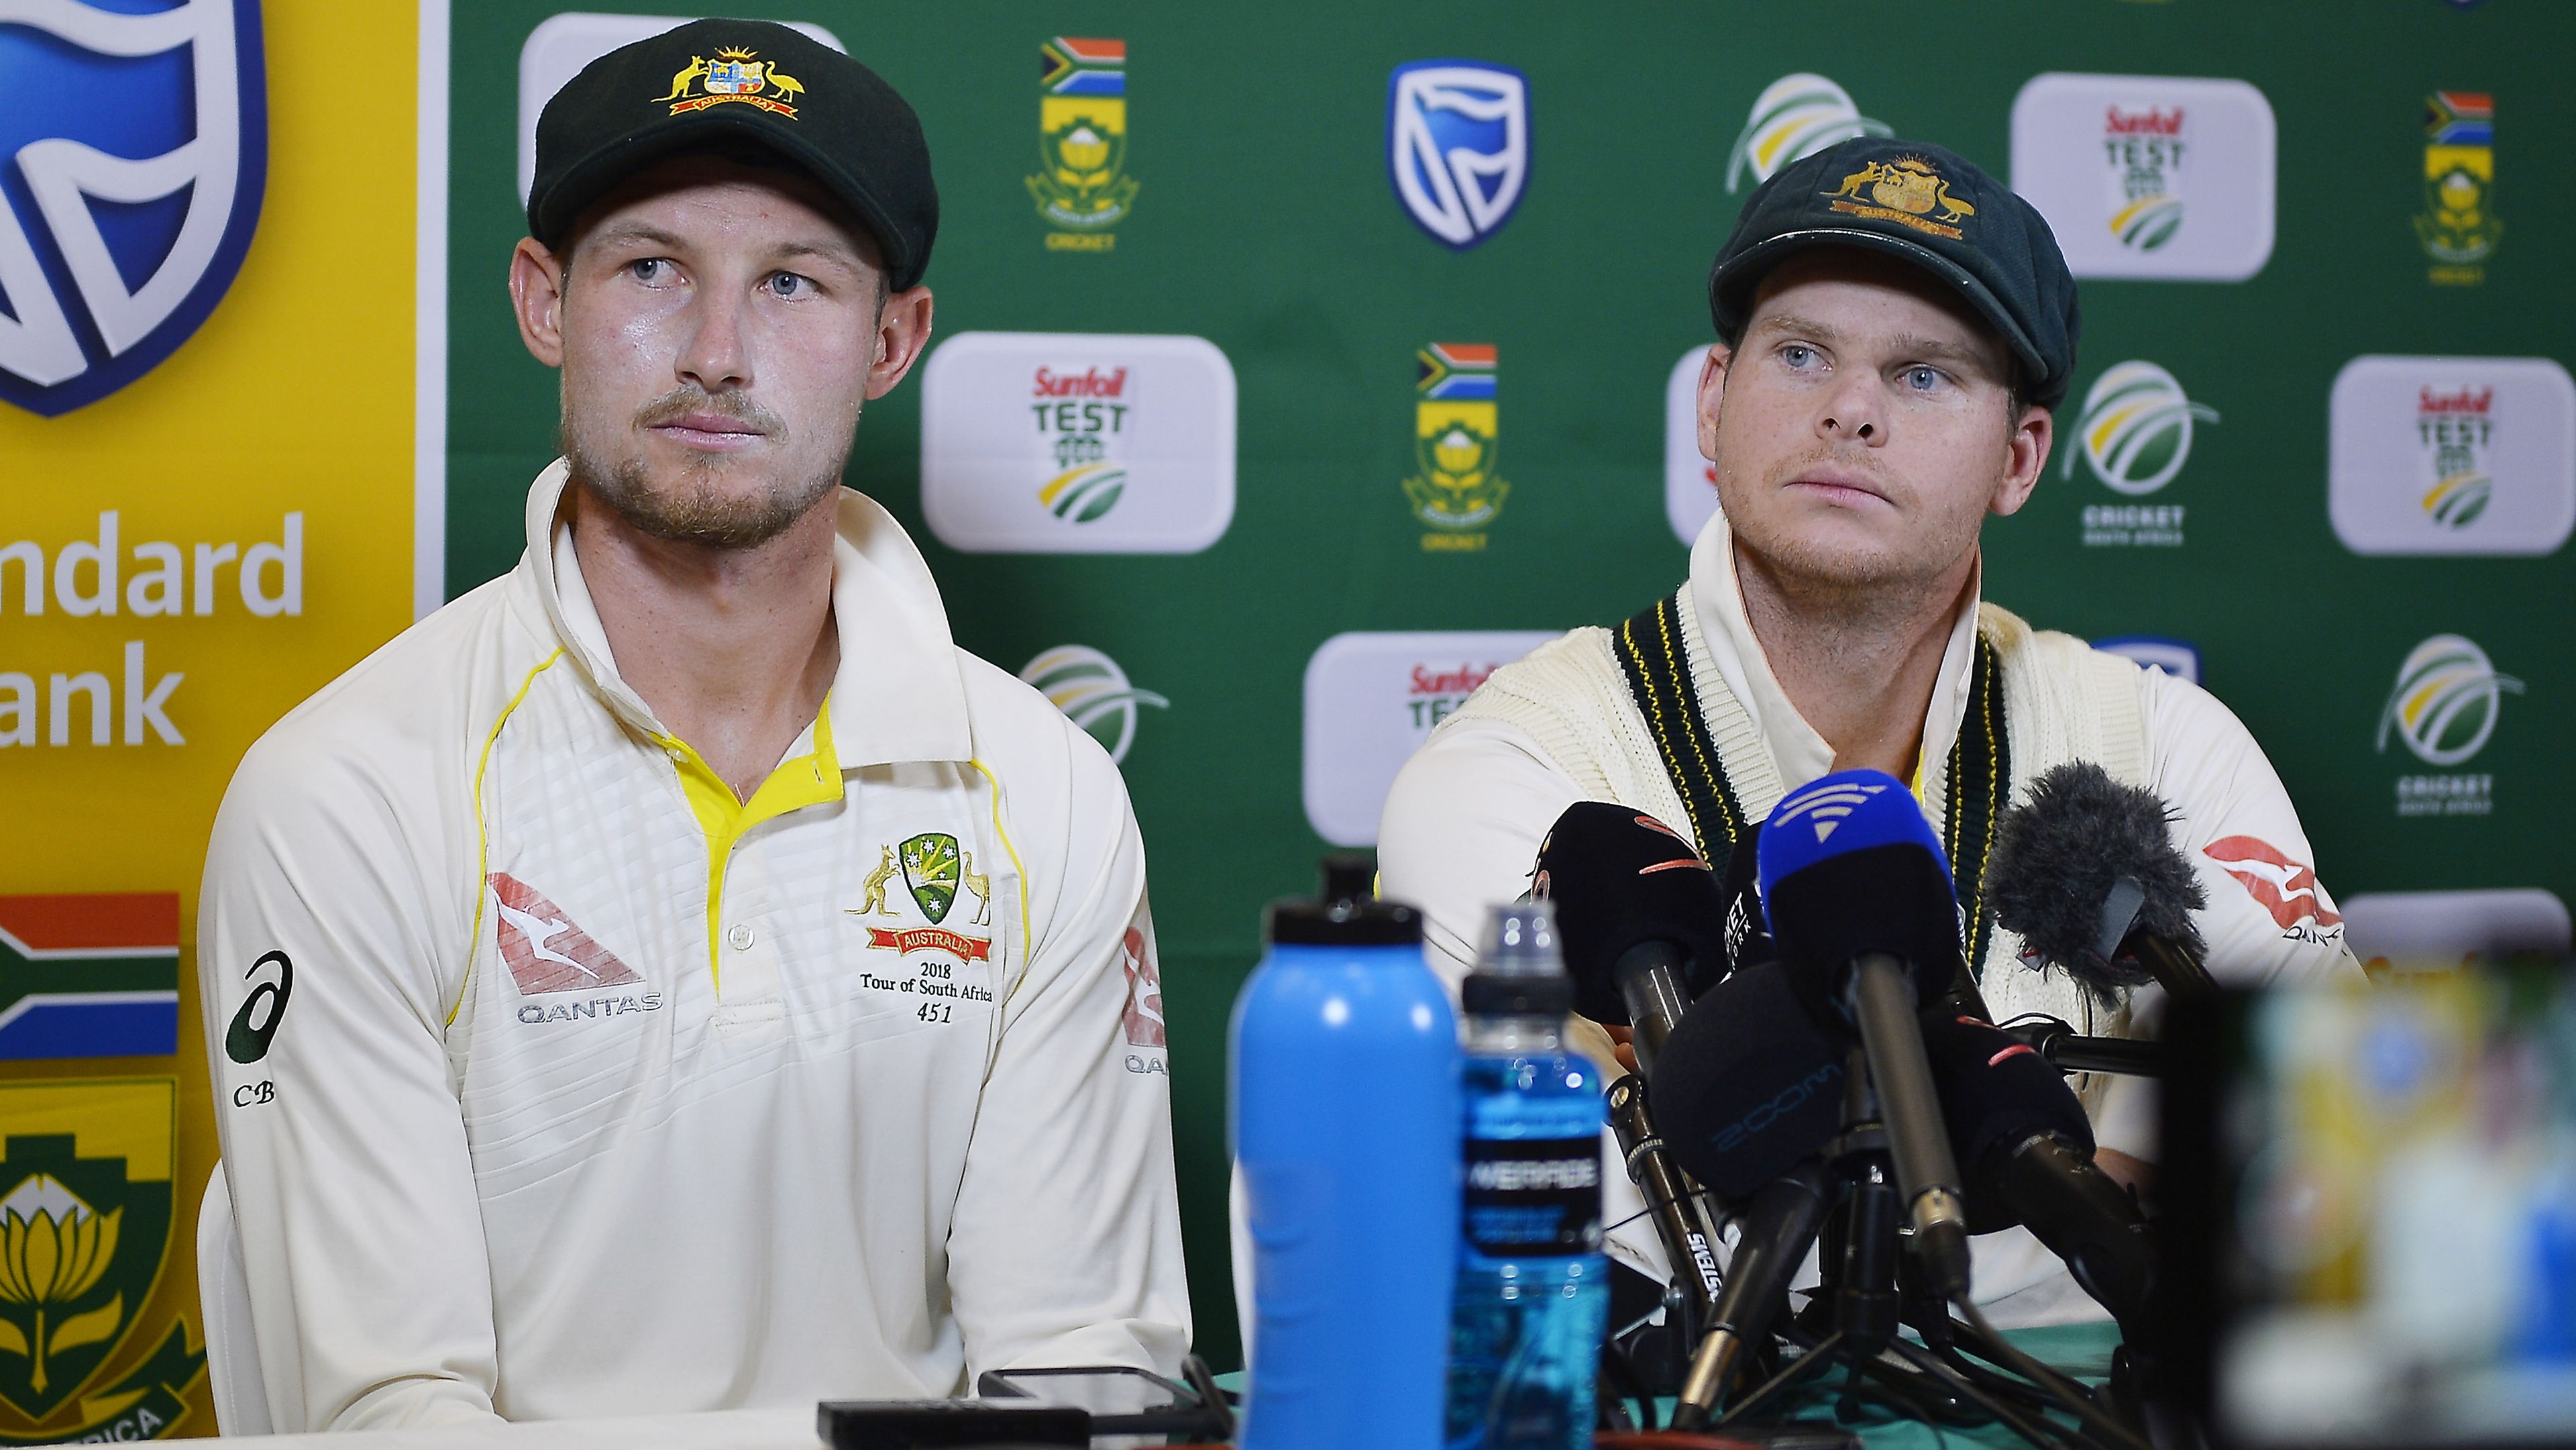 Steve Smith and Cameron Bancroft face the media after the Cape Town cheating scandal.